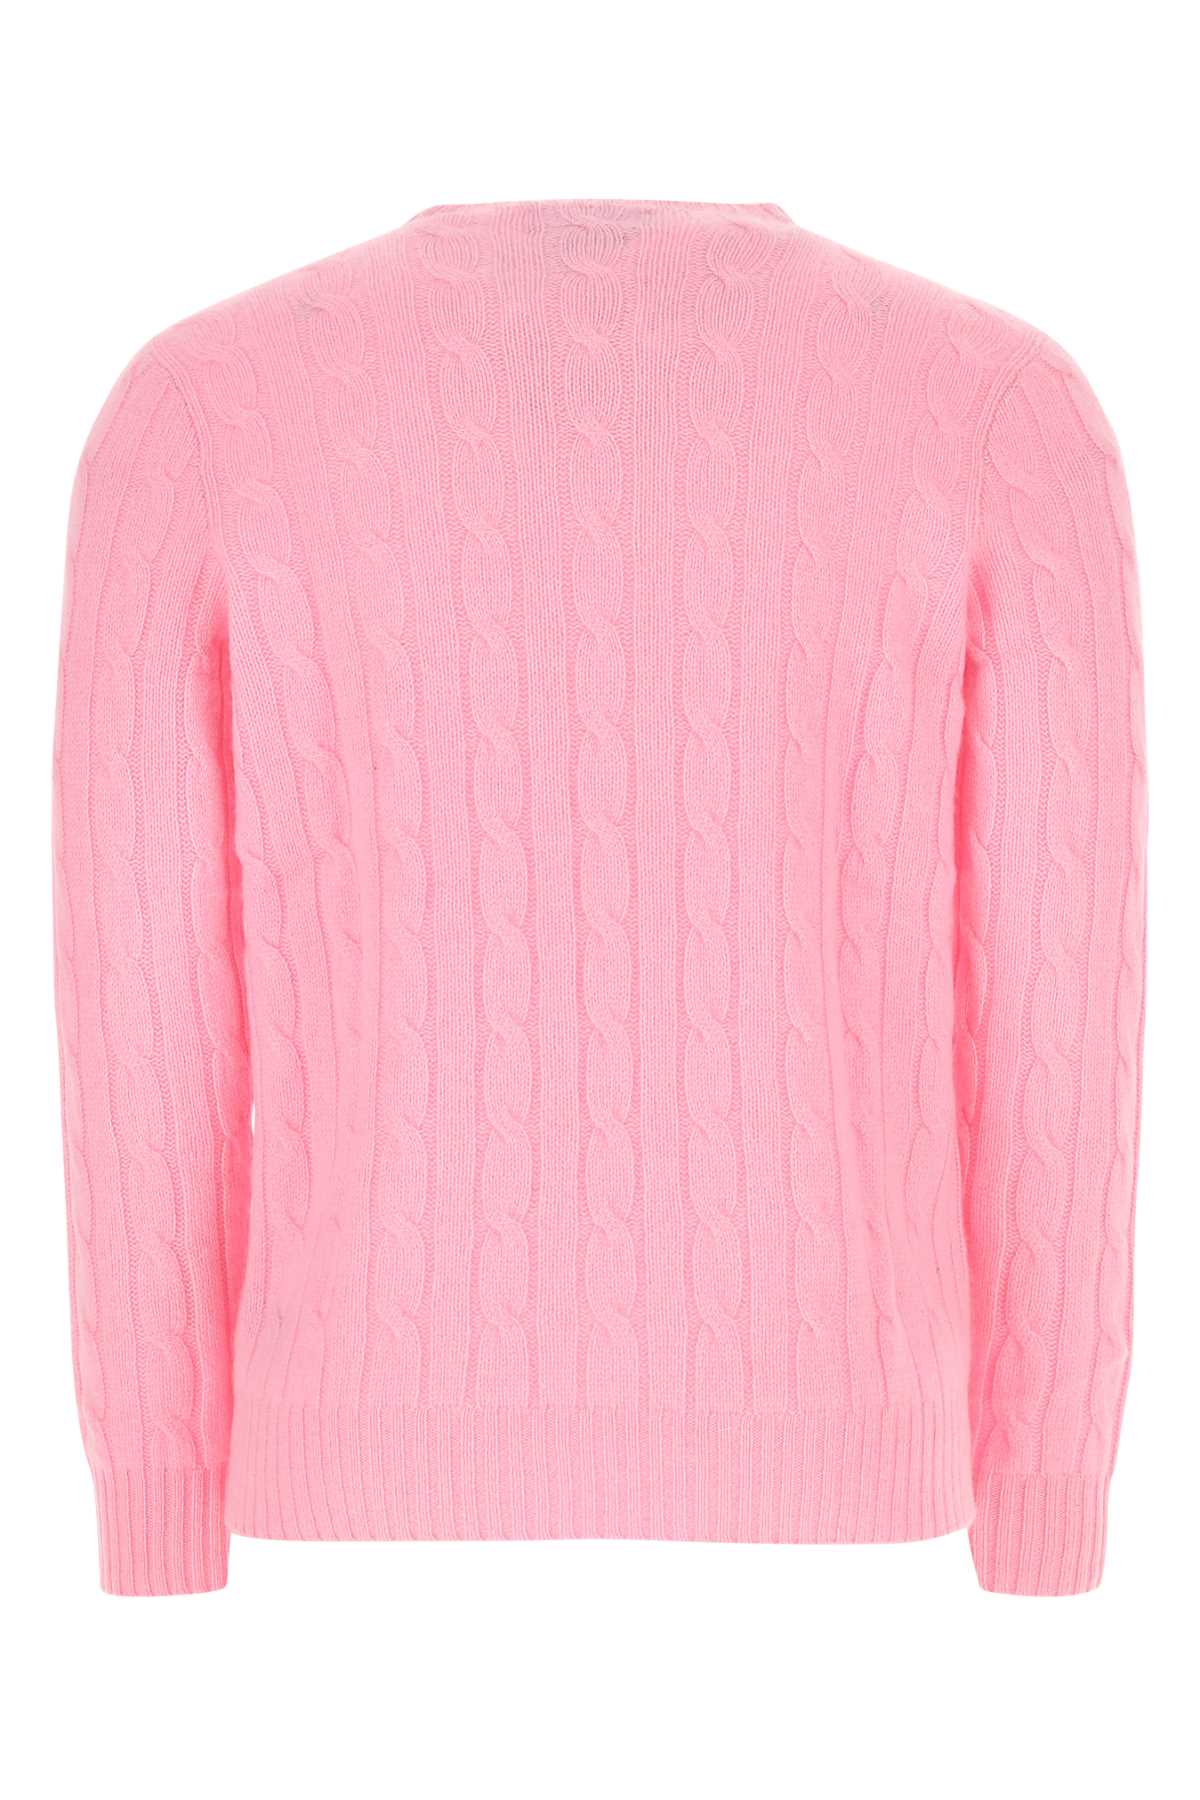 Polo Ralph Lauren Pink Cashmere Sweater In 001